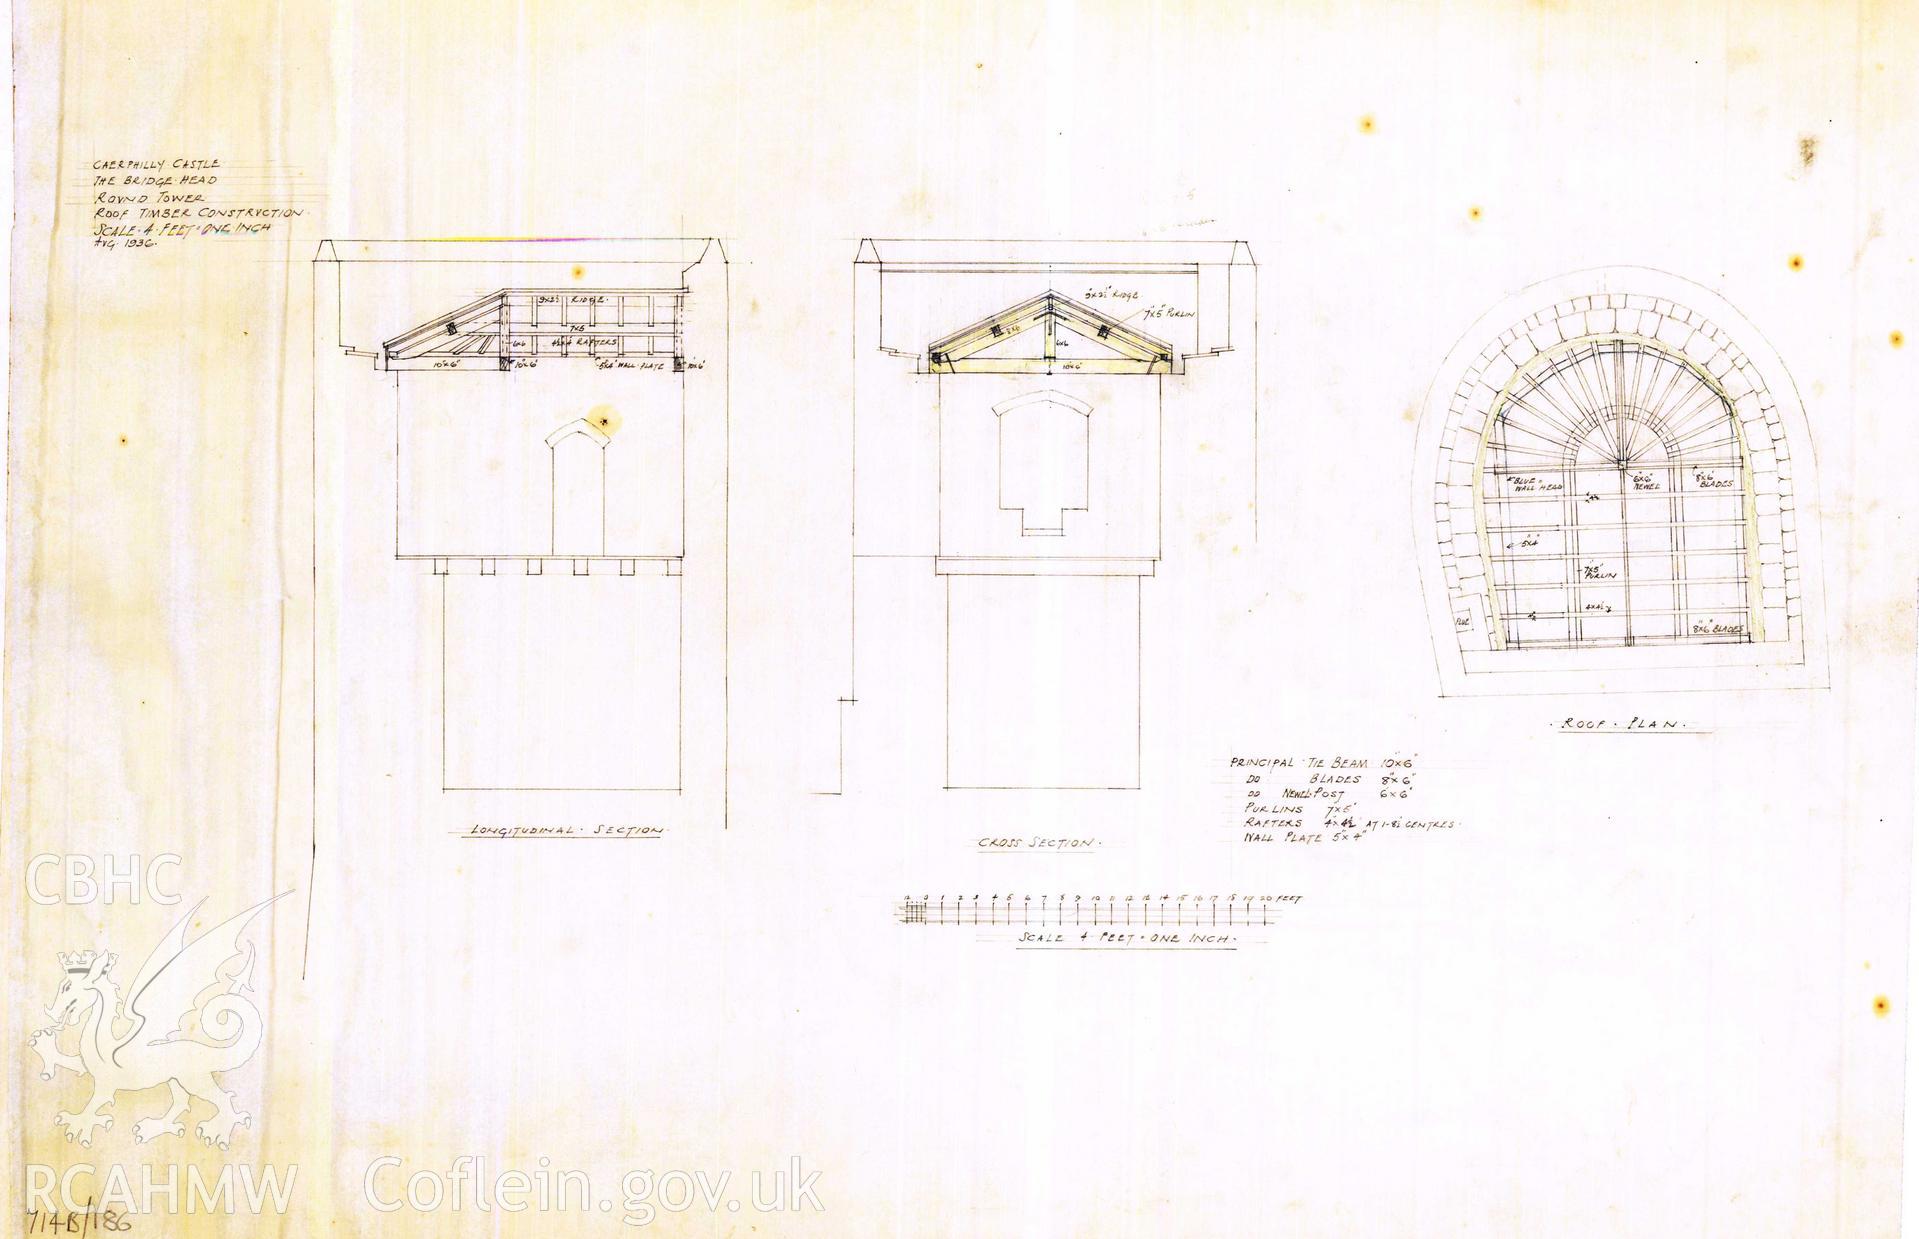 Cadw guardianship monument drawing of Caerphilly Castle. Dam S tower, sections+roof-beams. Cadw Ref. No:714B/186. Scale 1:48.